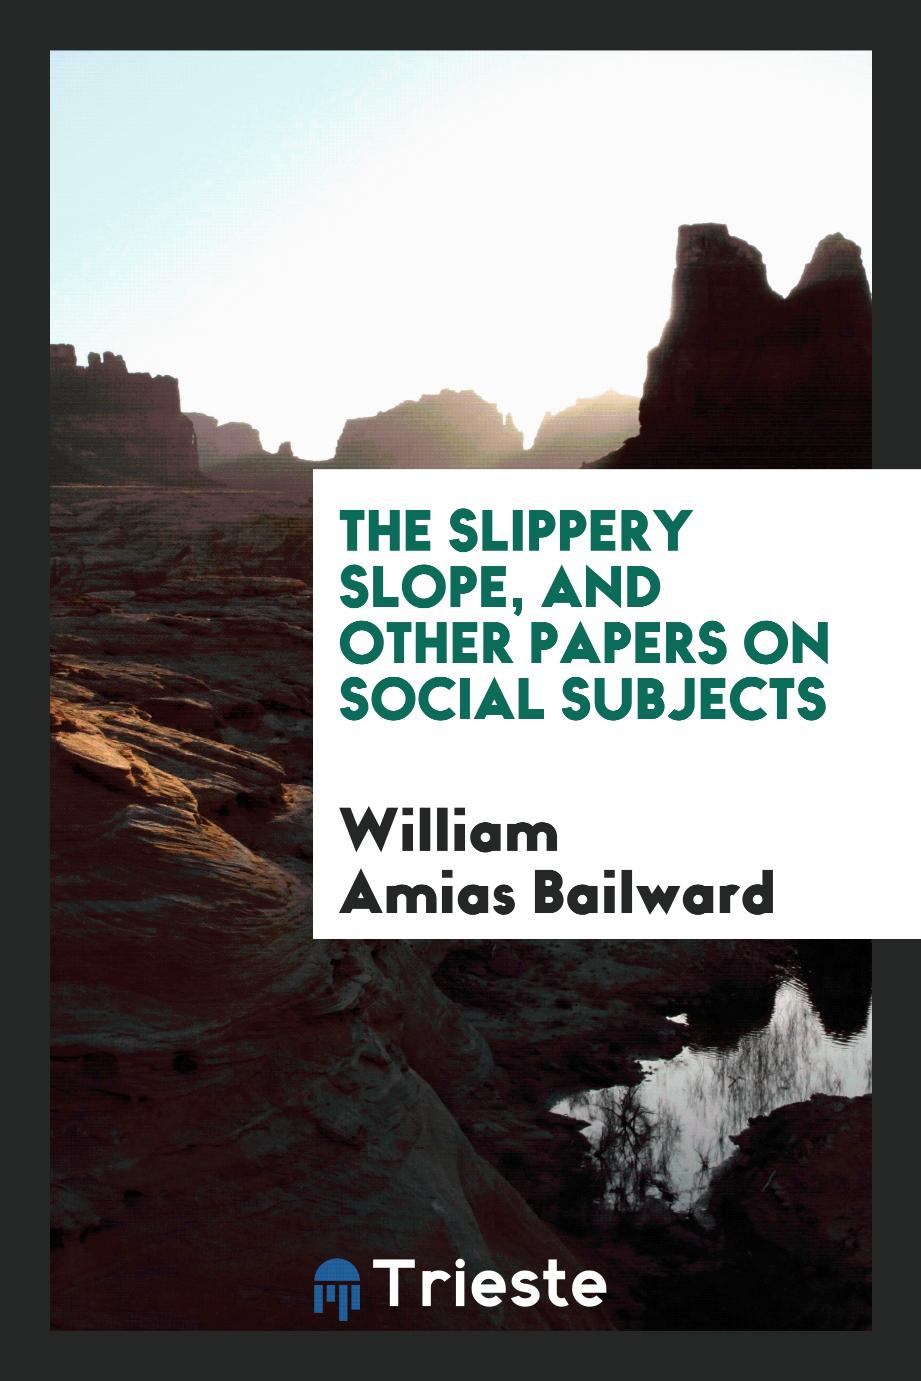 The slippery slope, and other papers on social subjects